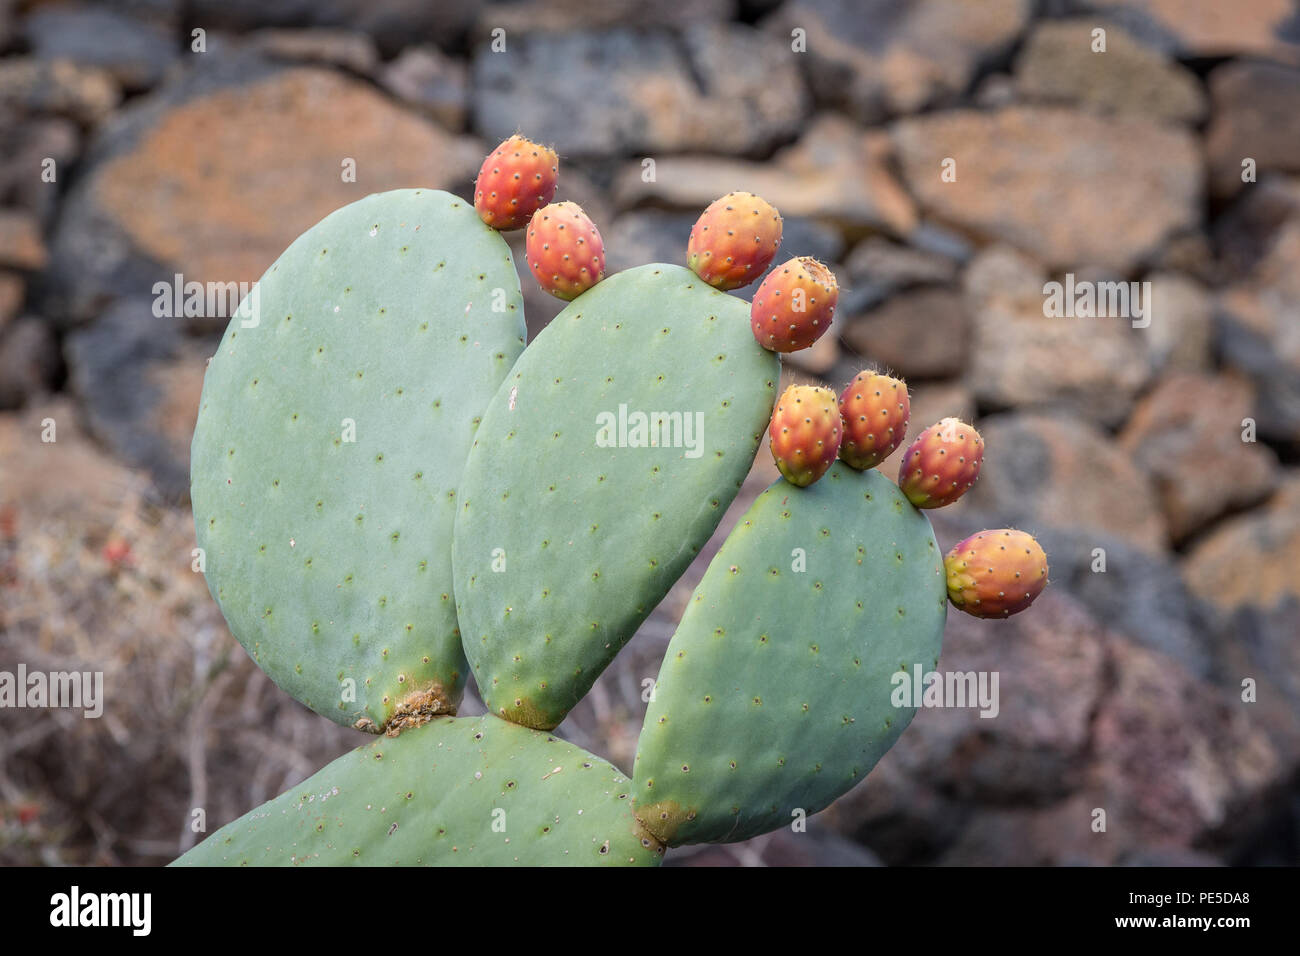 Prickly pears growing on the cactus plant. Stock Photo